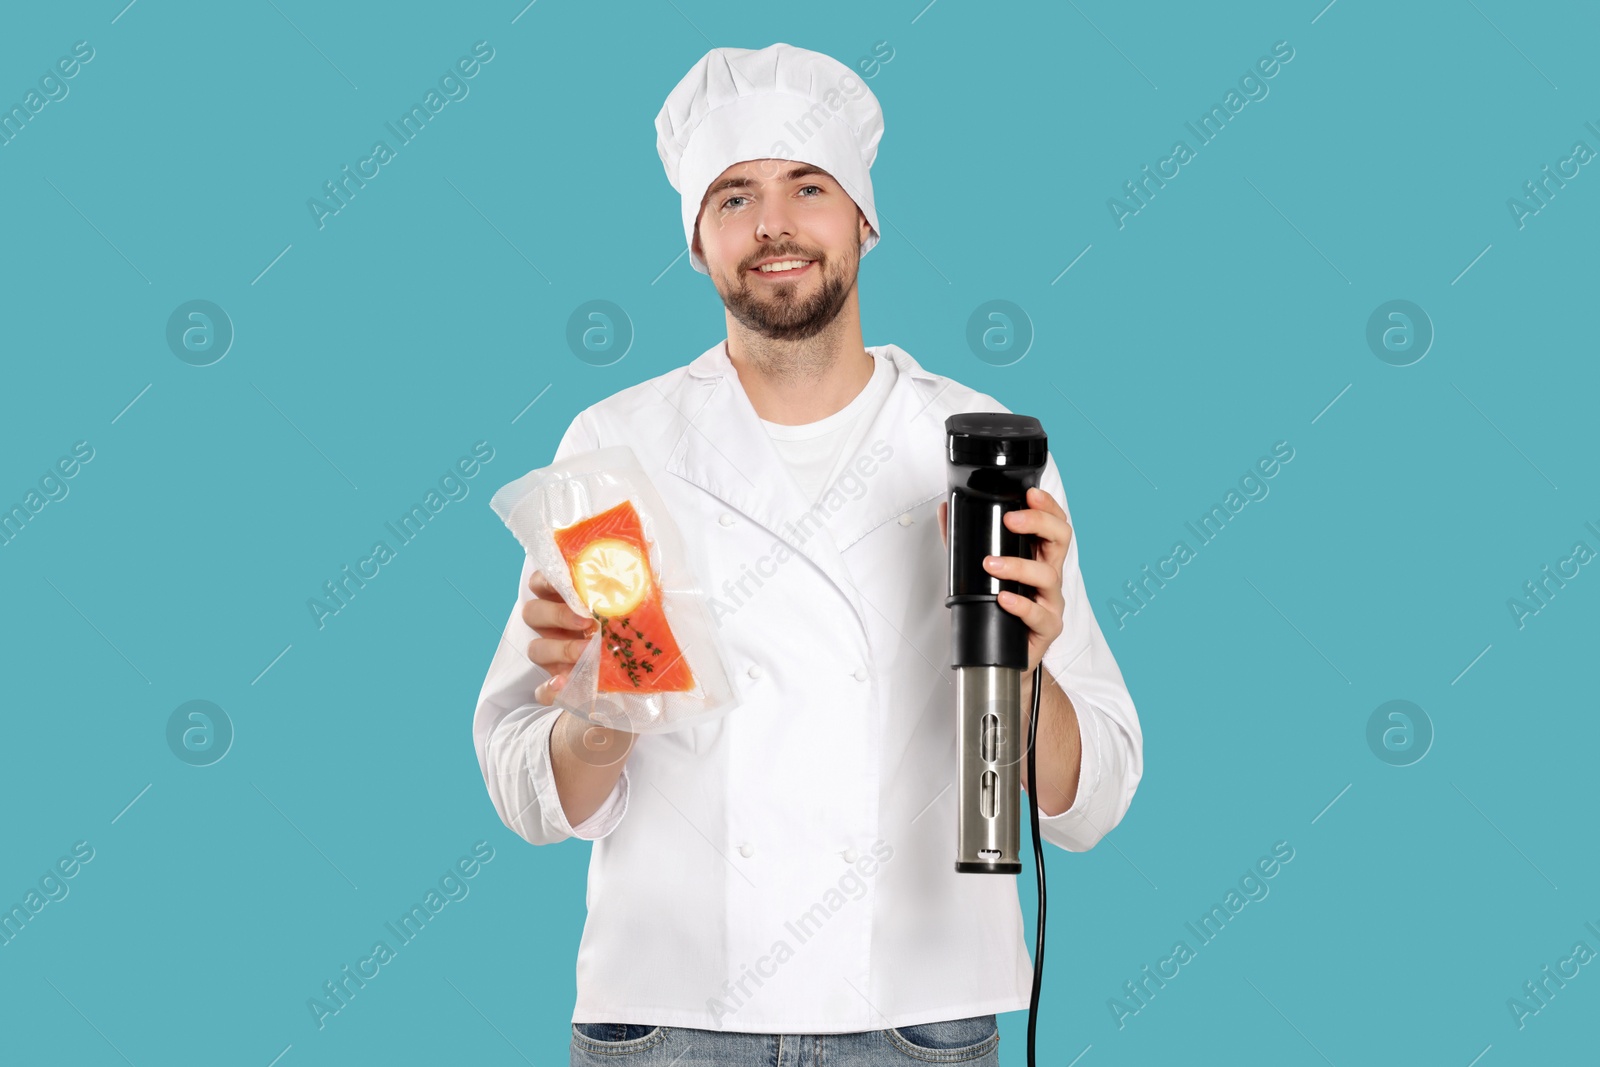 Photo of Smiling chef holding sous vide cooker and salmon in vacuum pack on light blue background